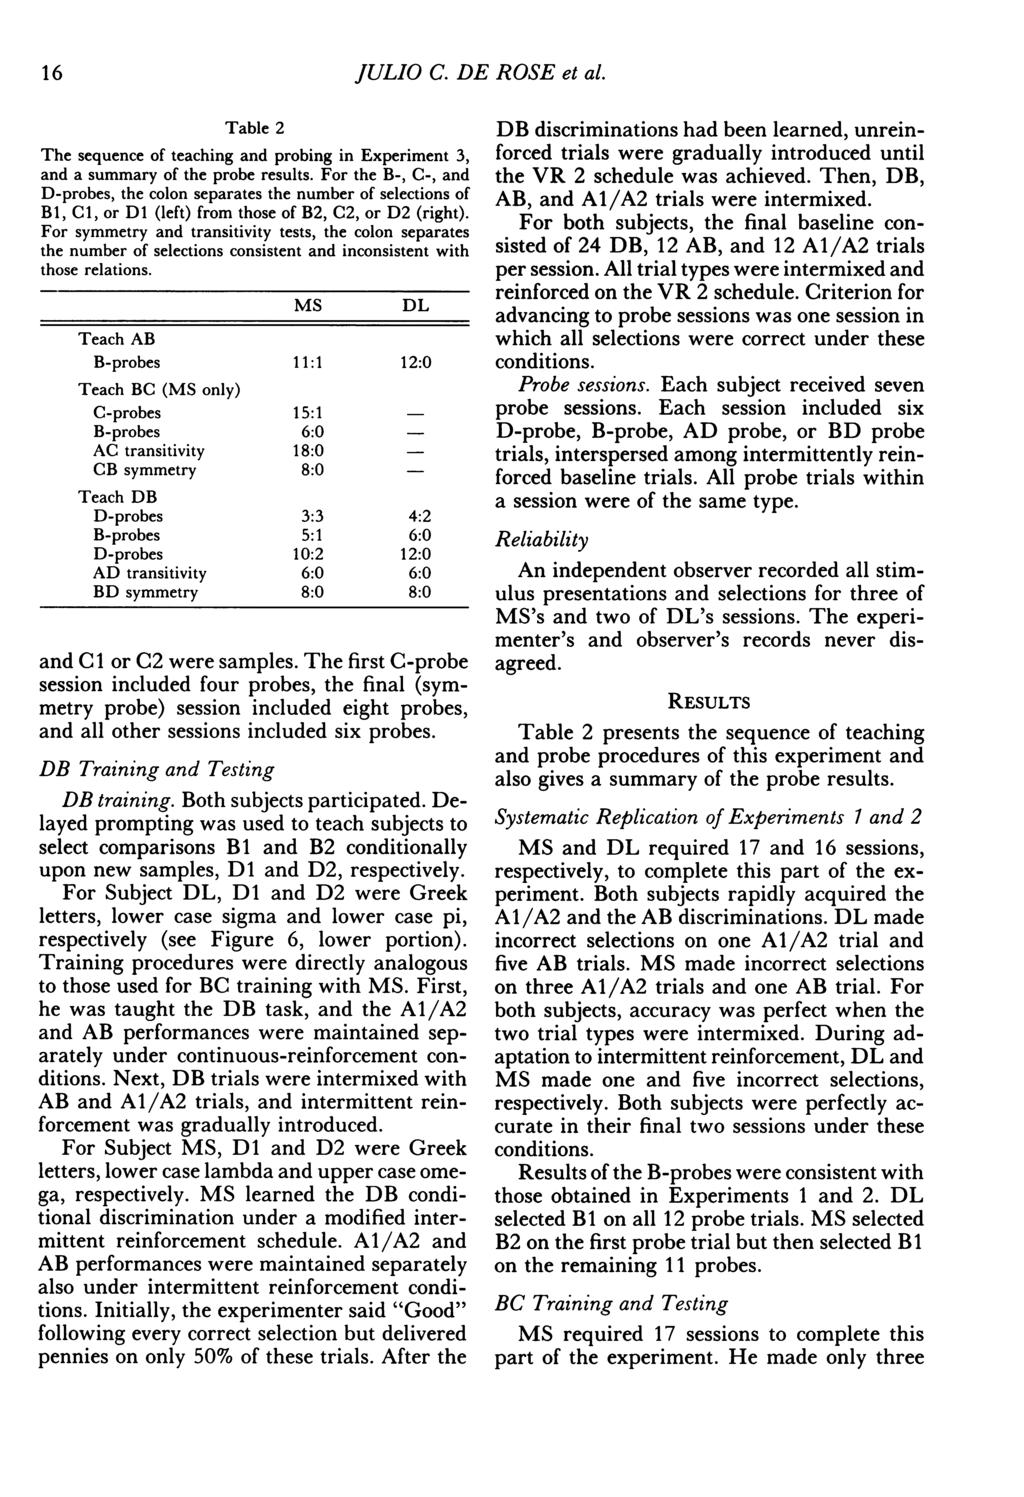 JULIO C. DE ROSE et al. Table 2 The sequence of teaching and probing in Experiment 3, and a summary of the probe results.